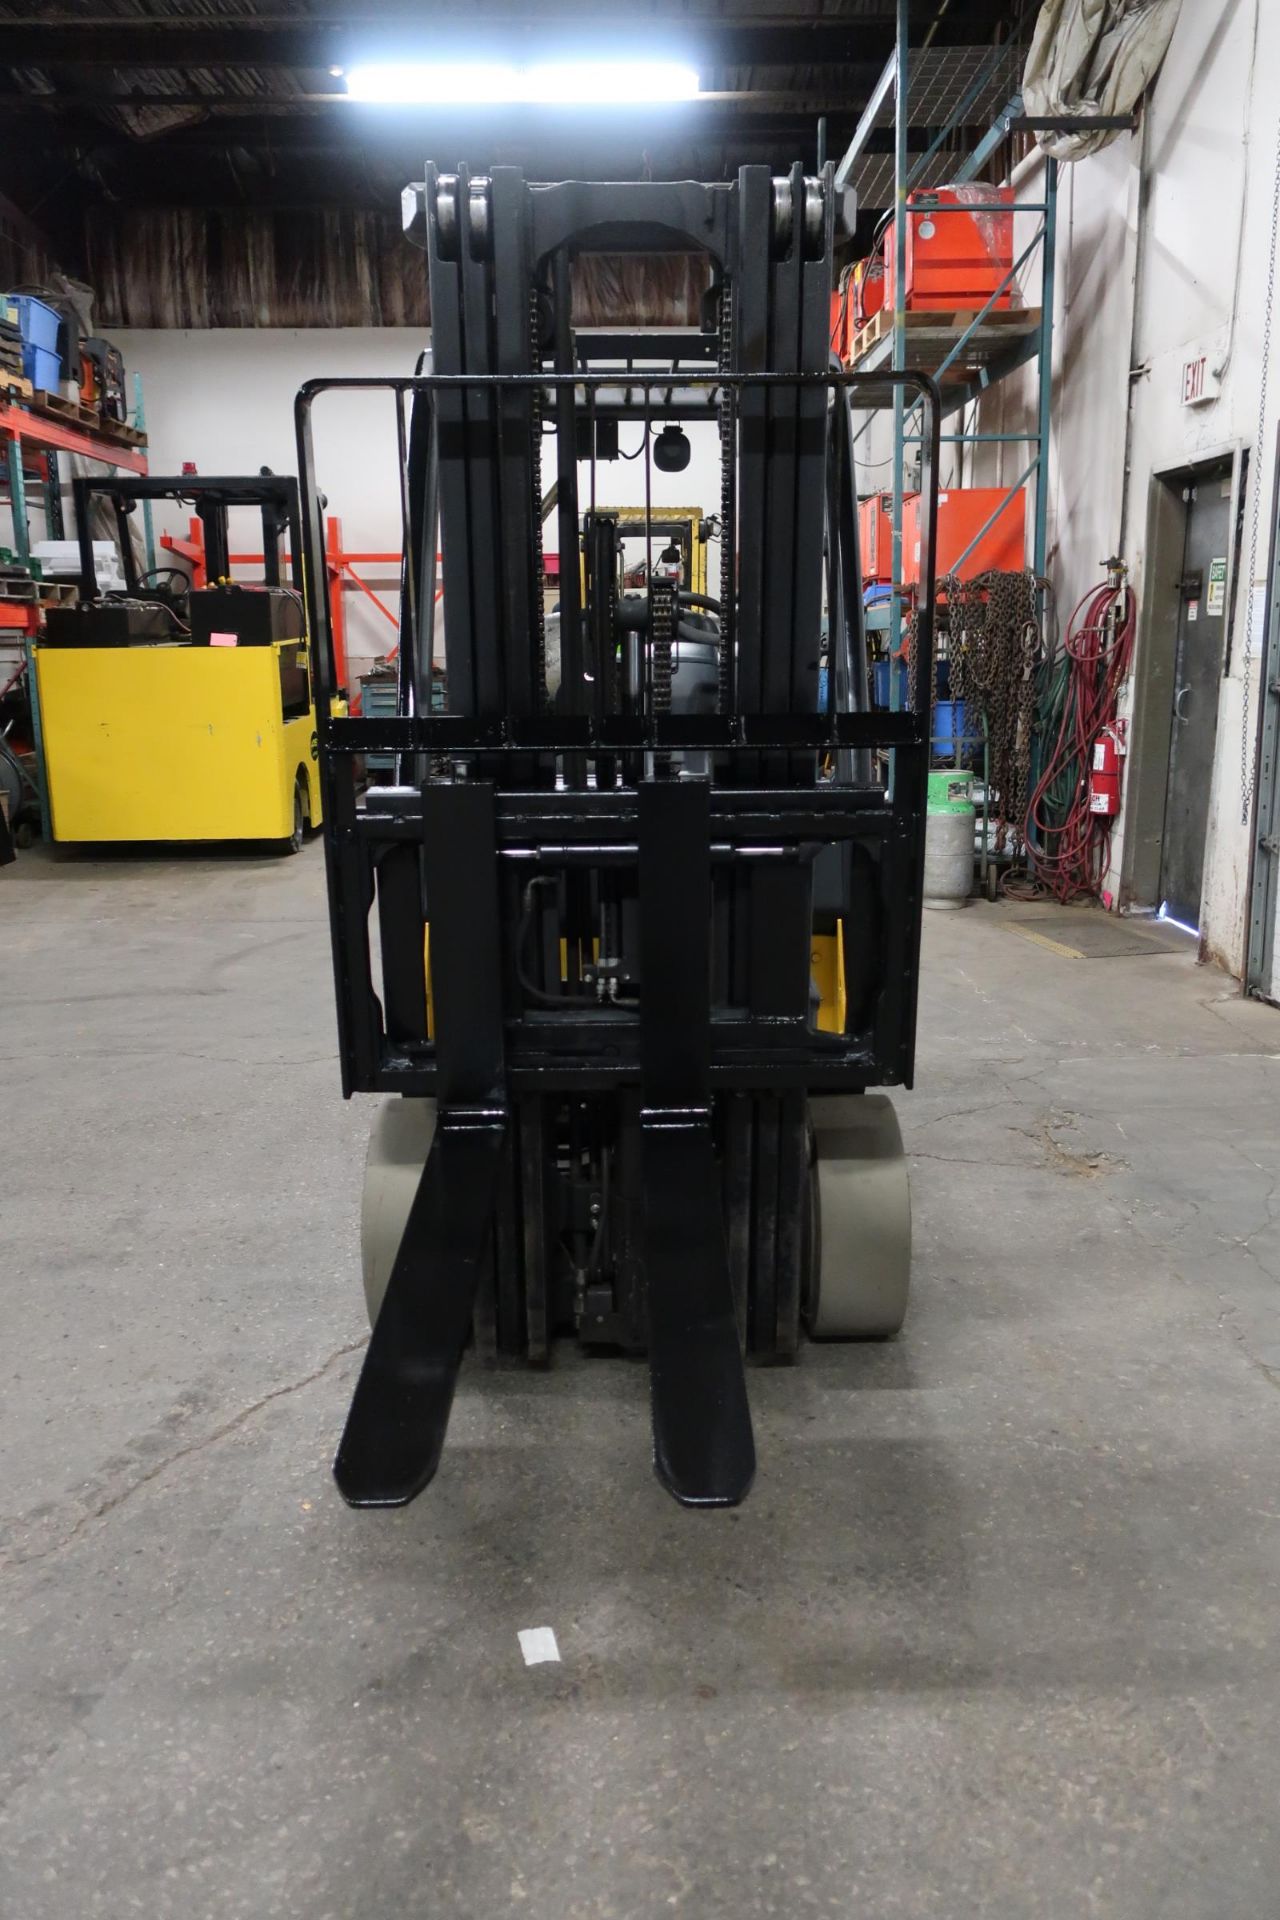 FREE CUSTOMS - 2013 Yale 6000lbs Capacity Forklift with 3-stage mast and sideshift - LPG ( - Image 2 of 2